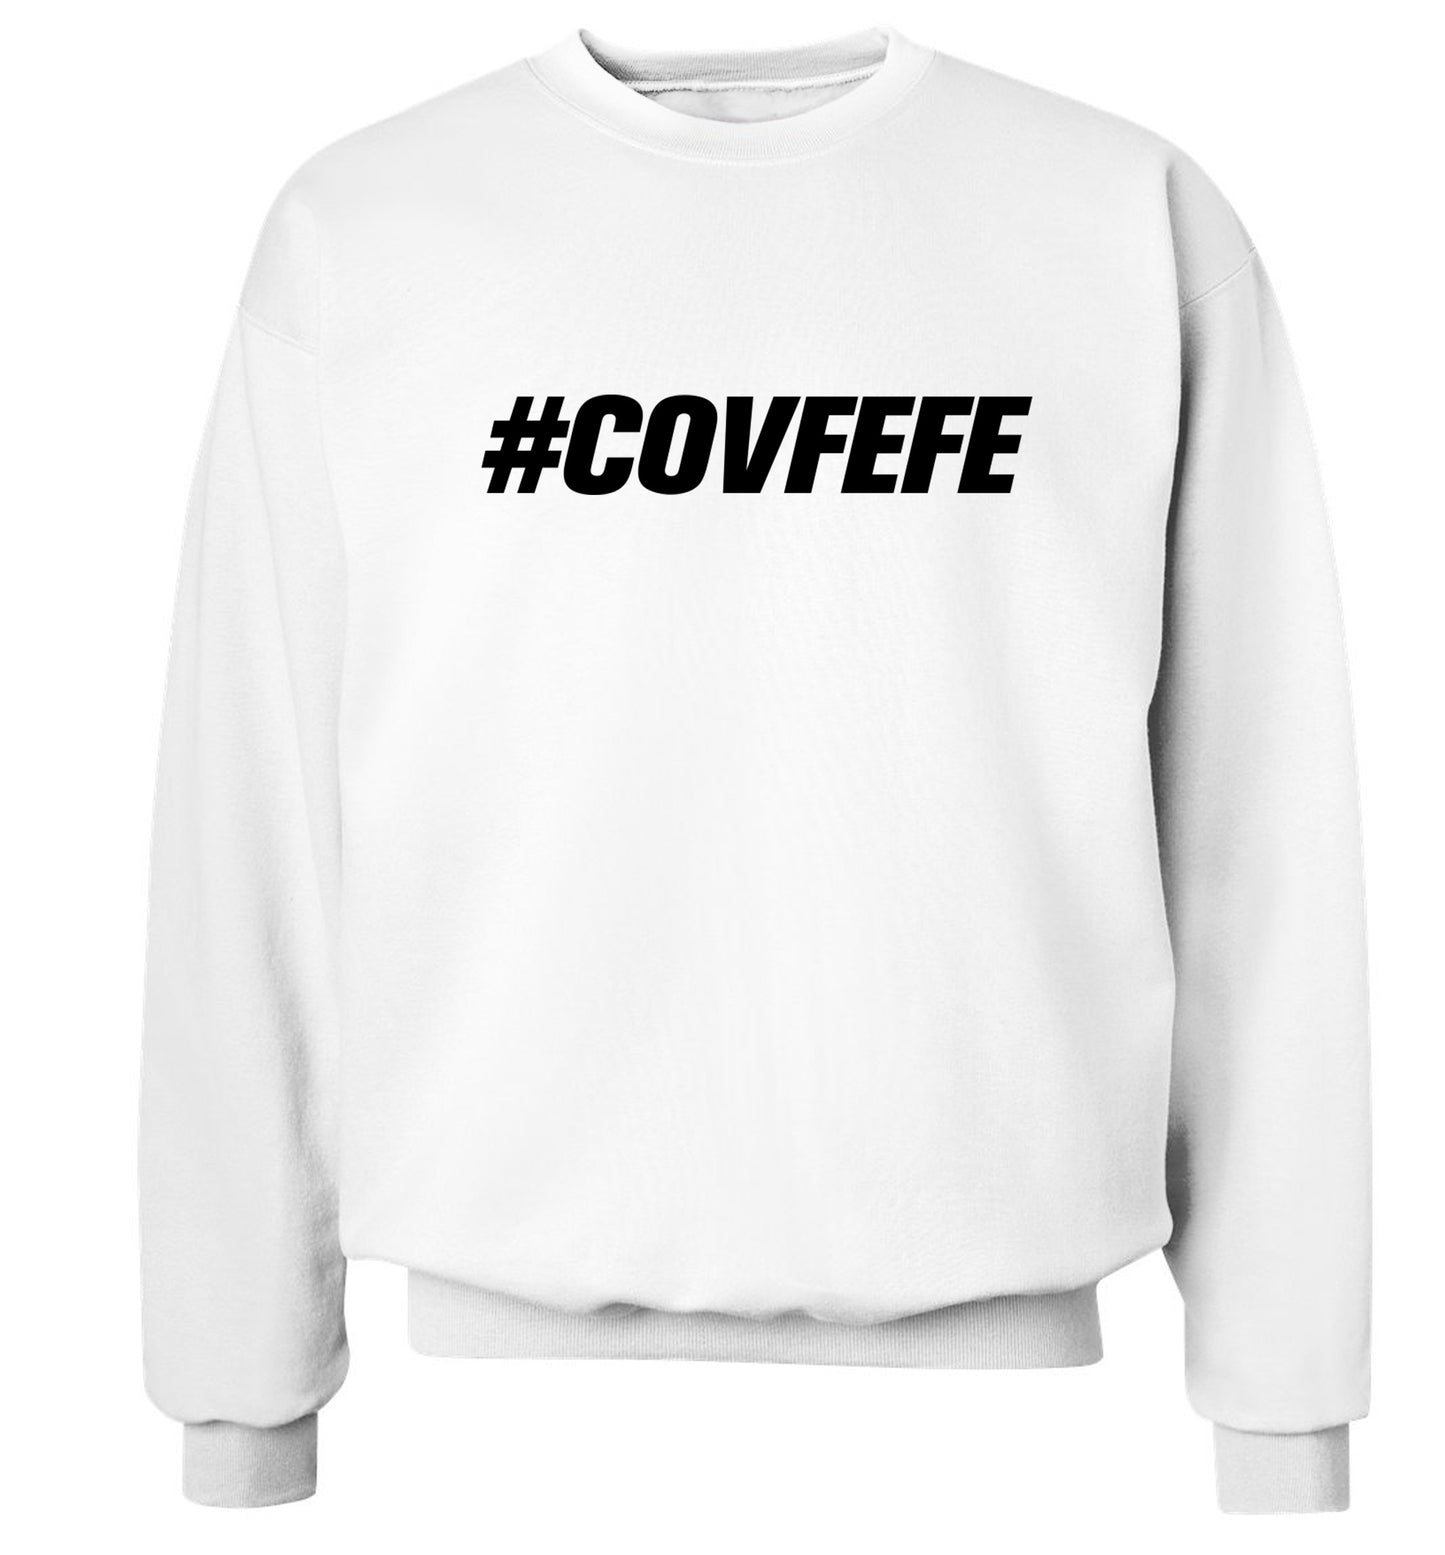 #covfefe Adult's unisex white Sweater 2XL